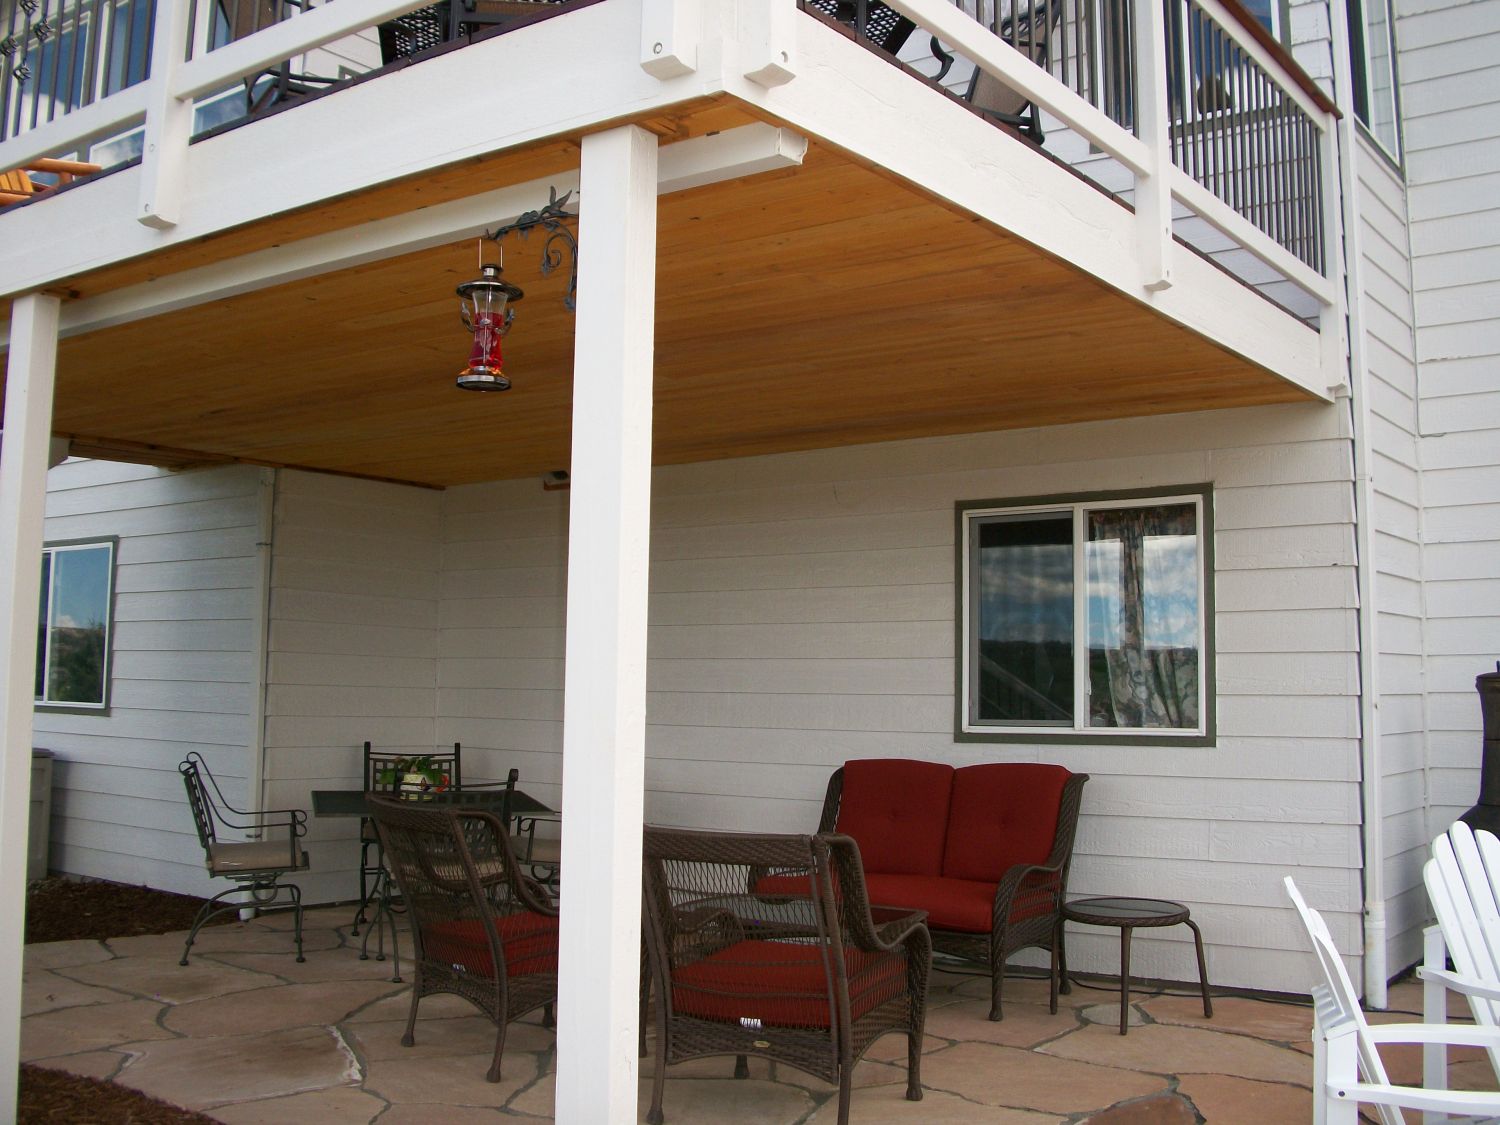 Elevated deck with an under-deck drainage system that features a flat ceiling.